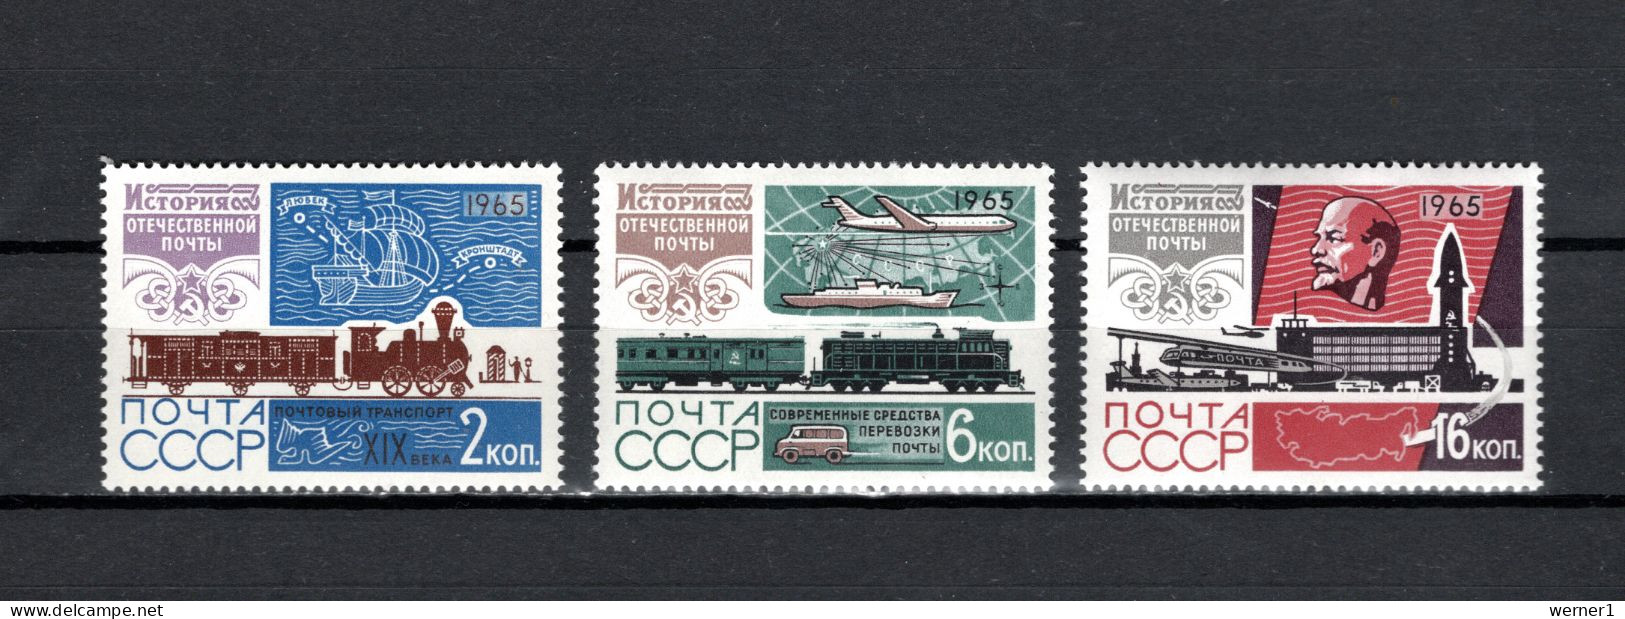 USSR Russia 1965 Space, Postal History Set Of 3 MNH - Russie & URSS